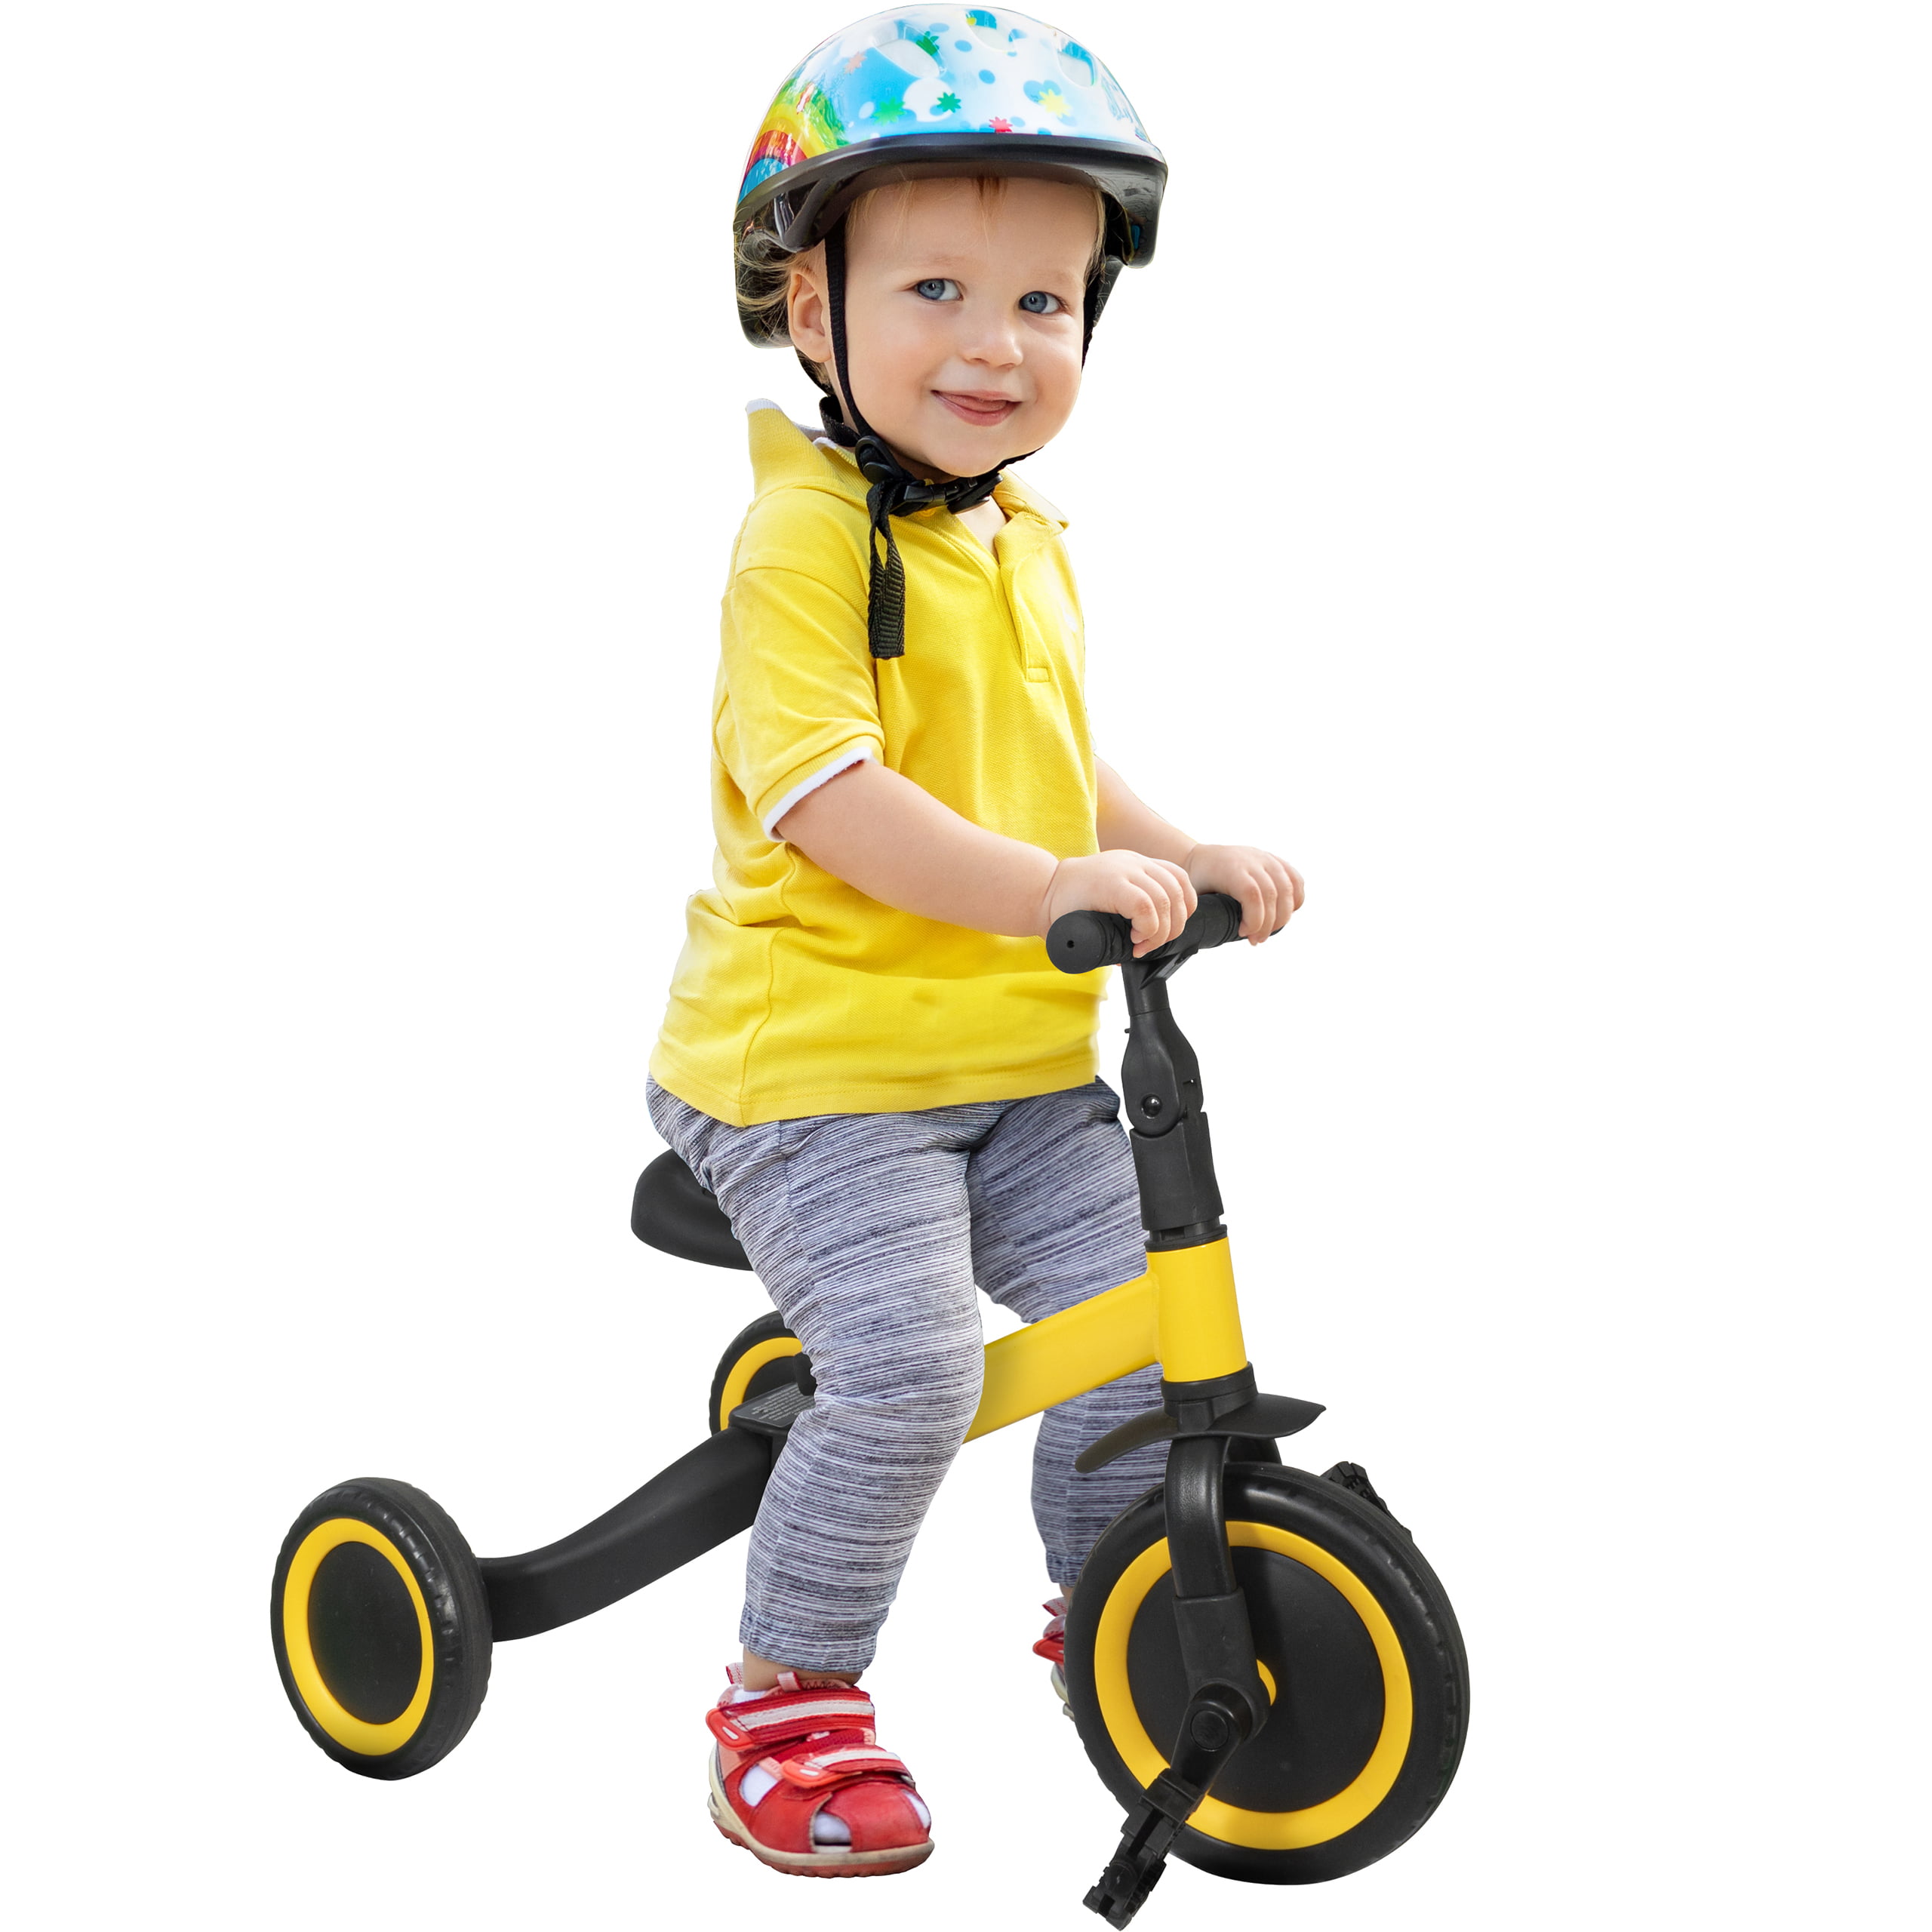 OLYSPM 4 in 1 Kids Trike Enlarged Body Toddler Tricycles Children Walker With Parent Steering Push Handle,Folding balance bike for 1-6 Years Old Boys Girls 